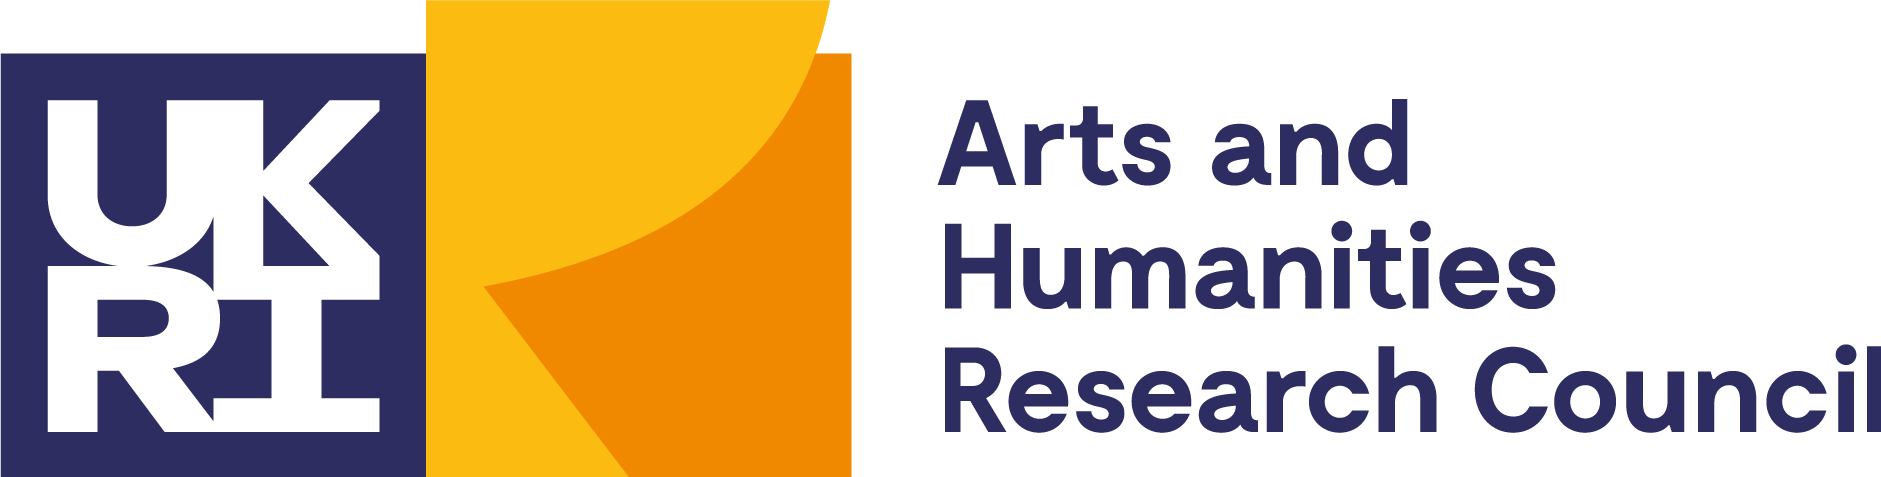 Funded by the Arts and Humanities Research Council